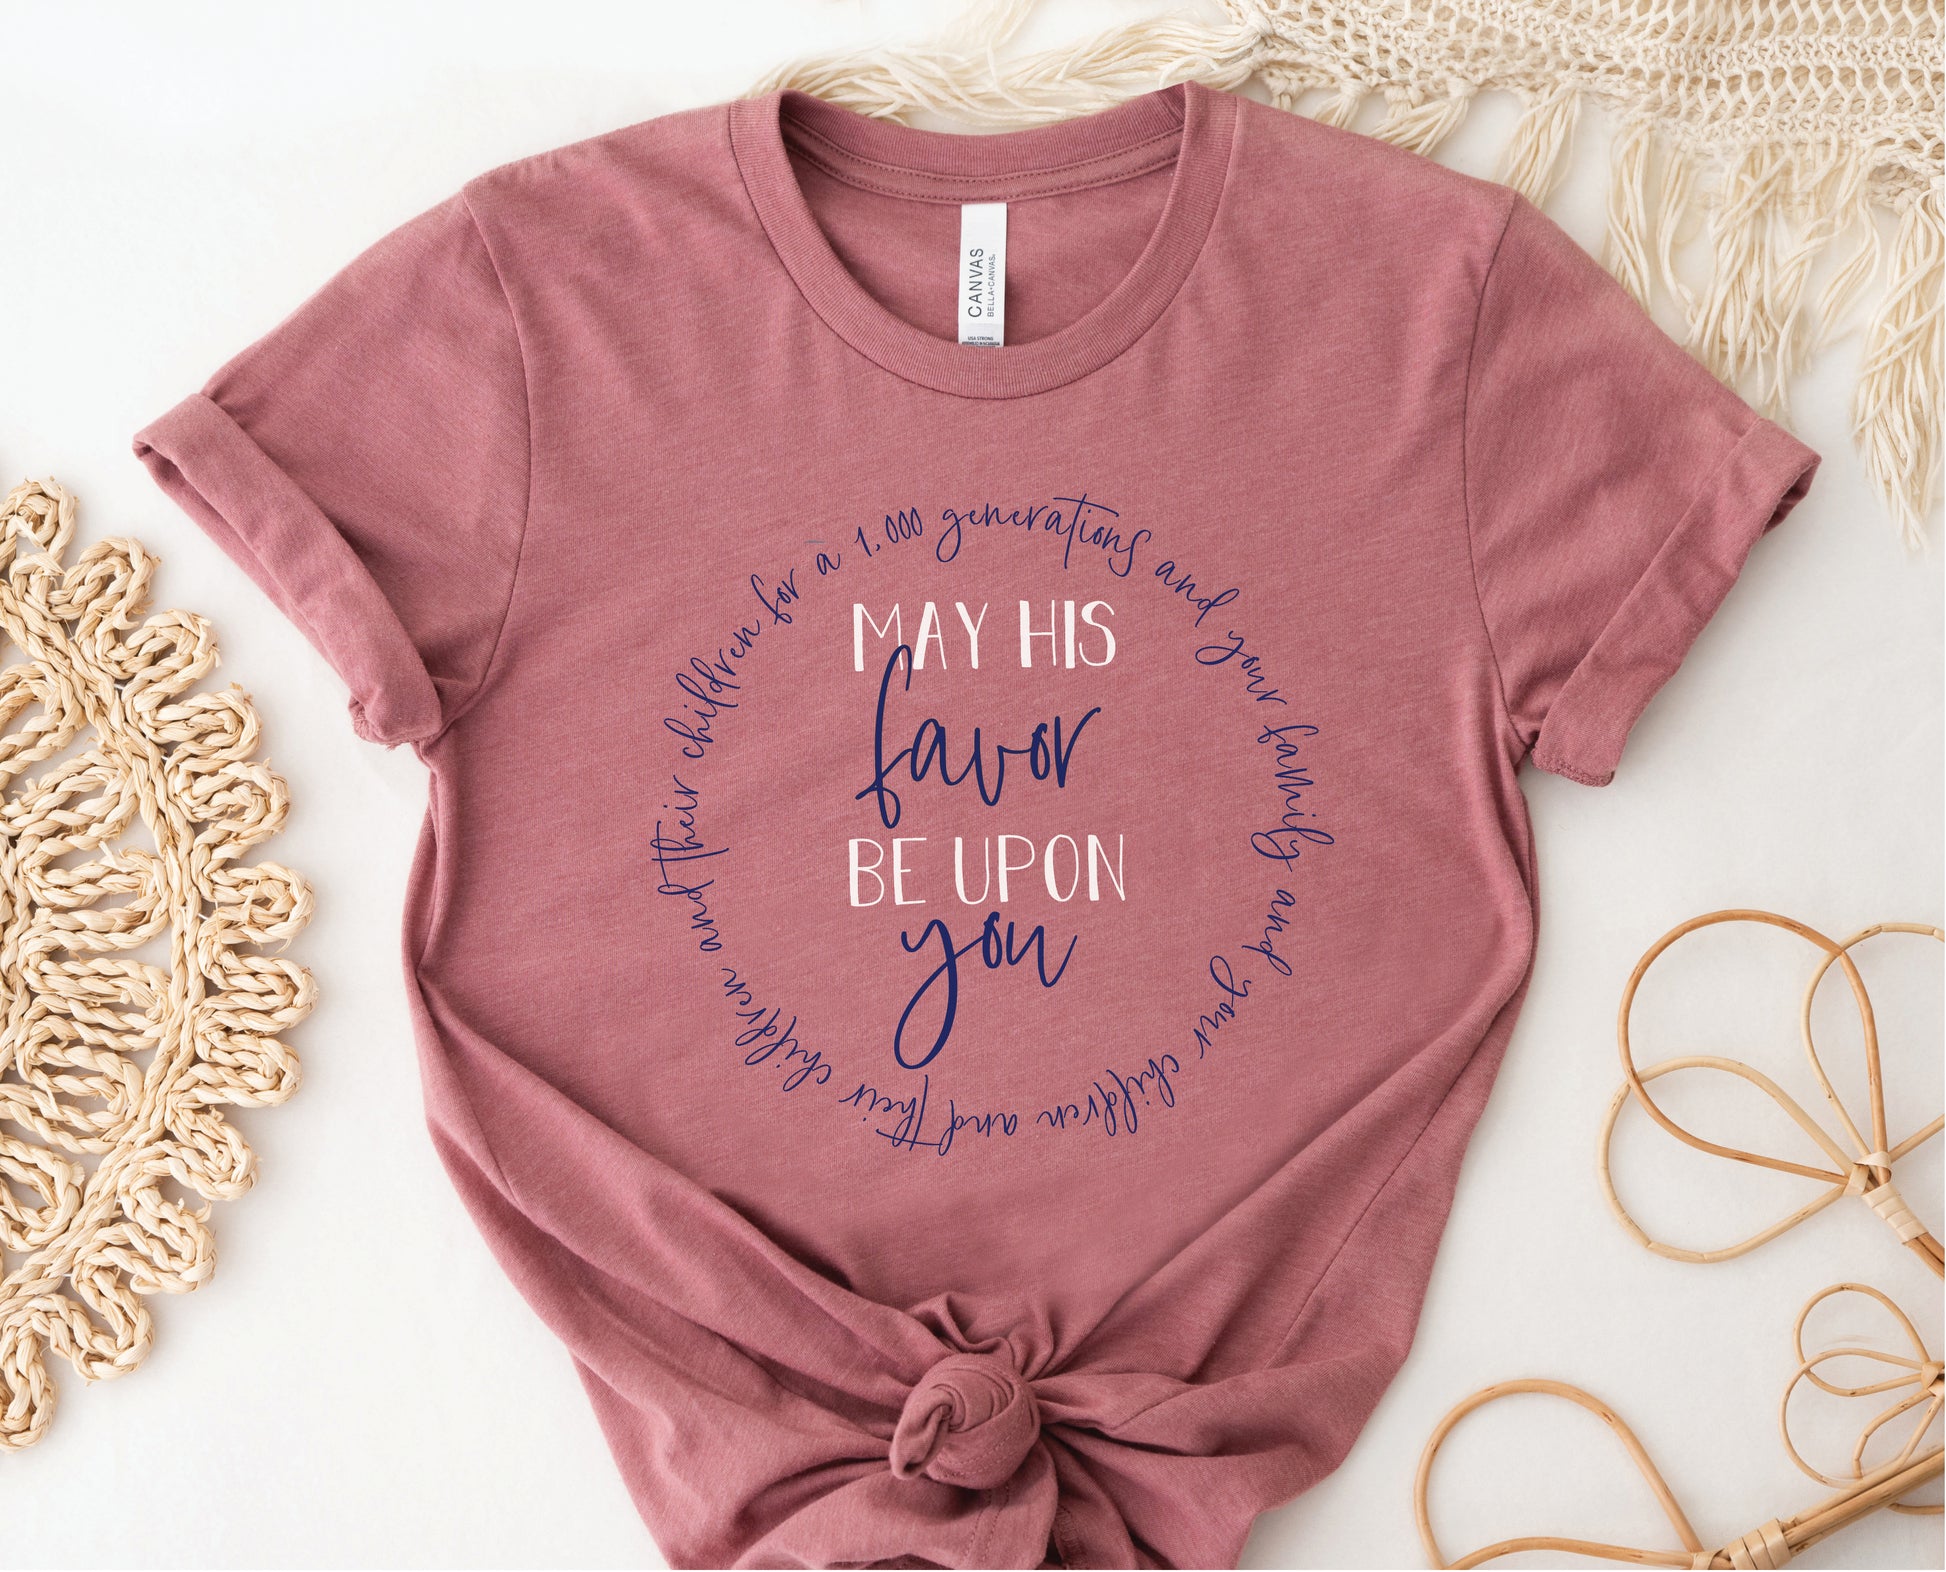 May His Favor Be Upon family & children Numbers 6 The Blessing Christian aesthetic circle design printed on soft mauve t-shirt for women